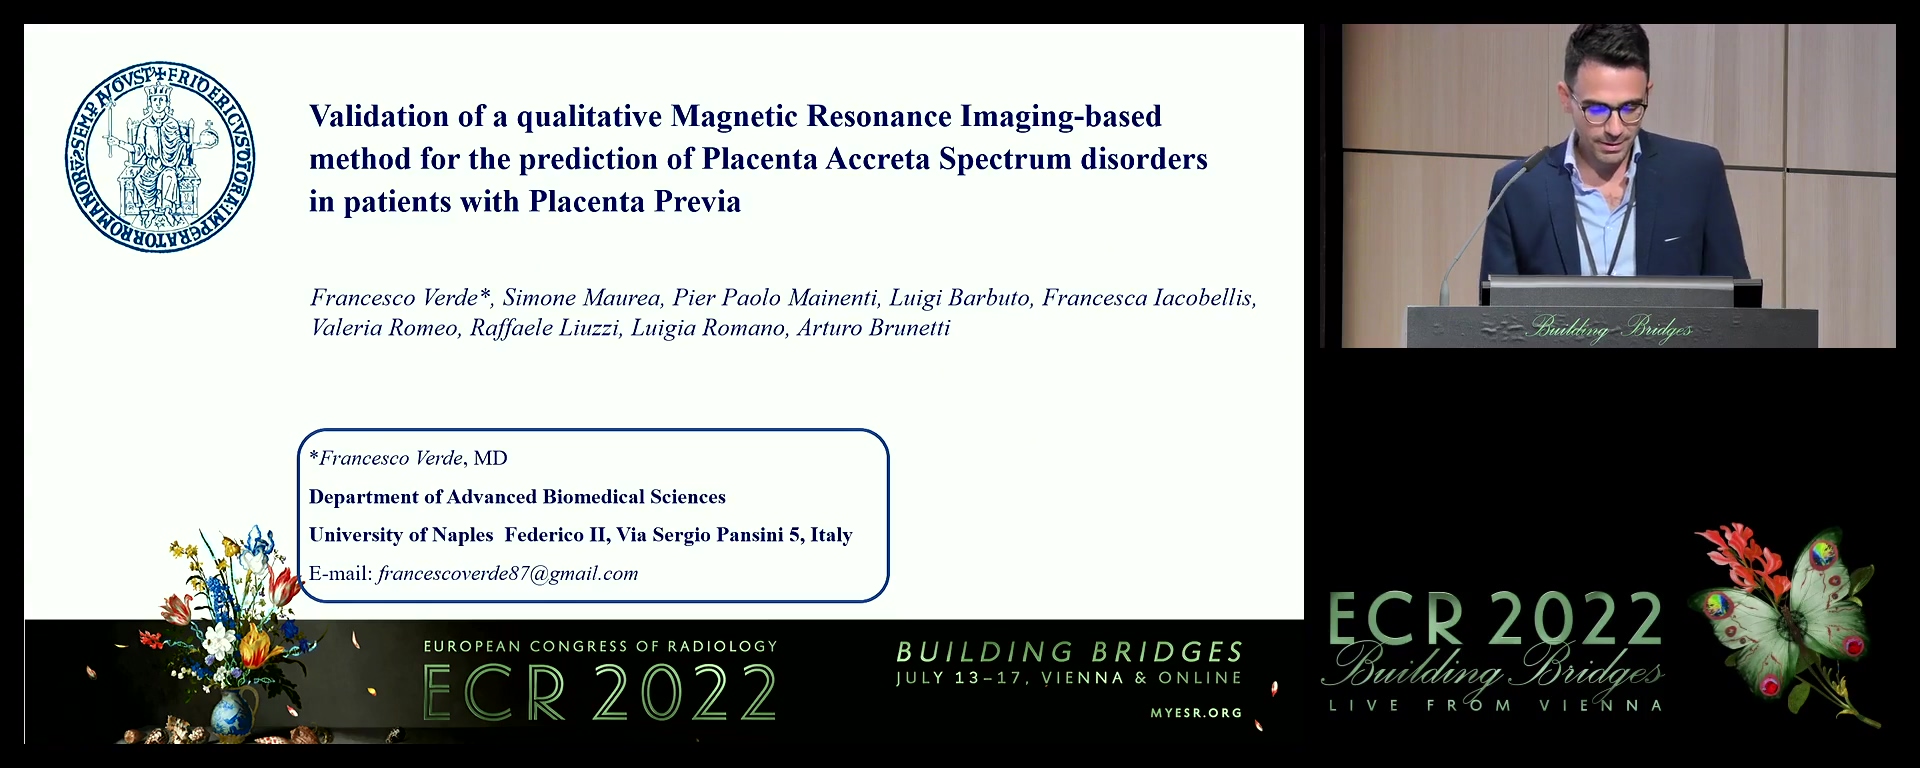 Validation of a qualitative magnetic resonance imaging-based method to predict placenta accreta spectrum disorders in patients with placenta previa - Francesco Verde, Sant'Antimo / IT